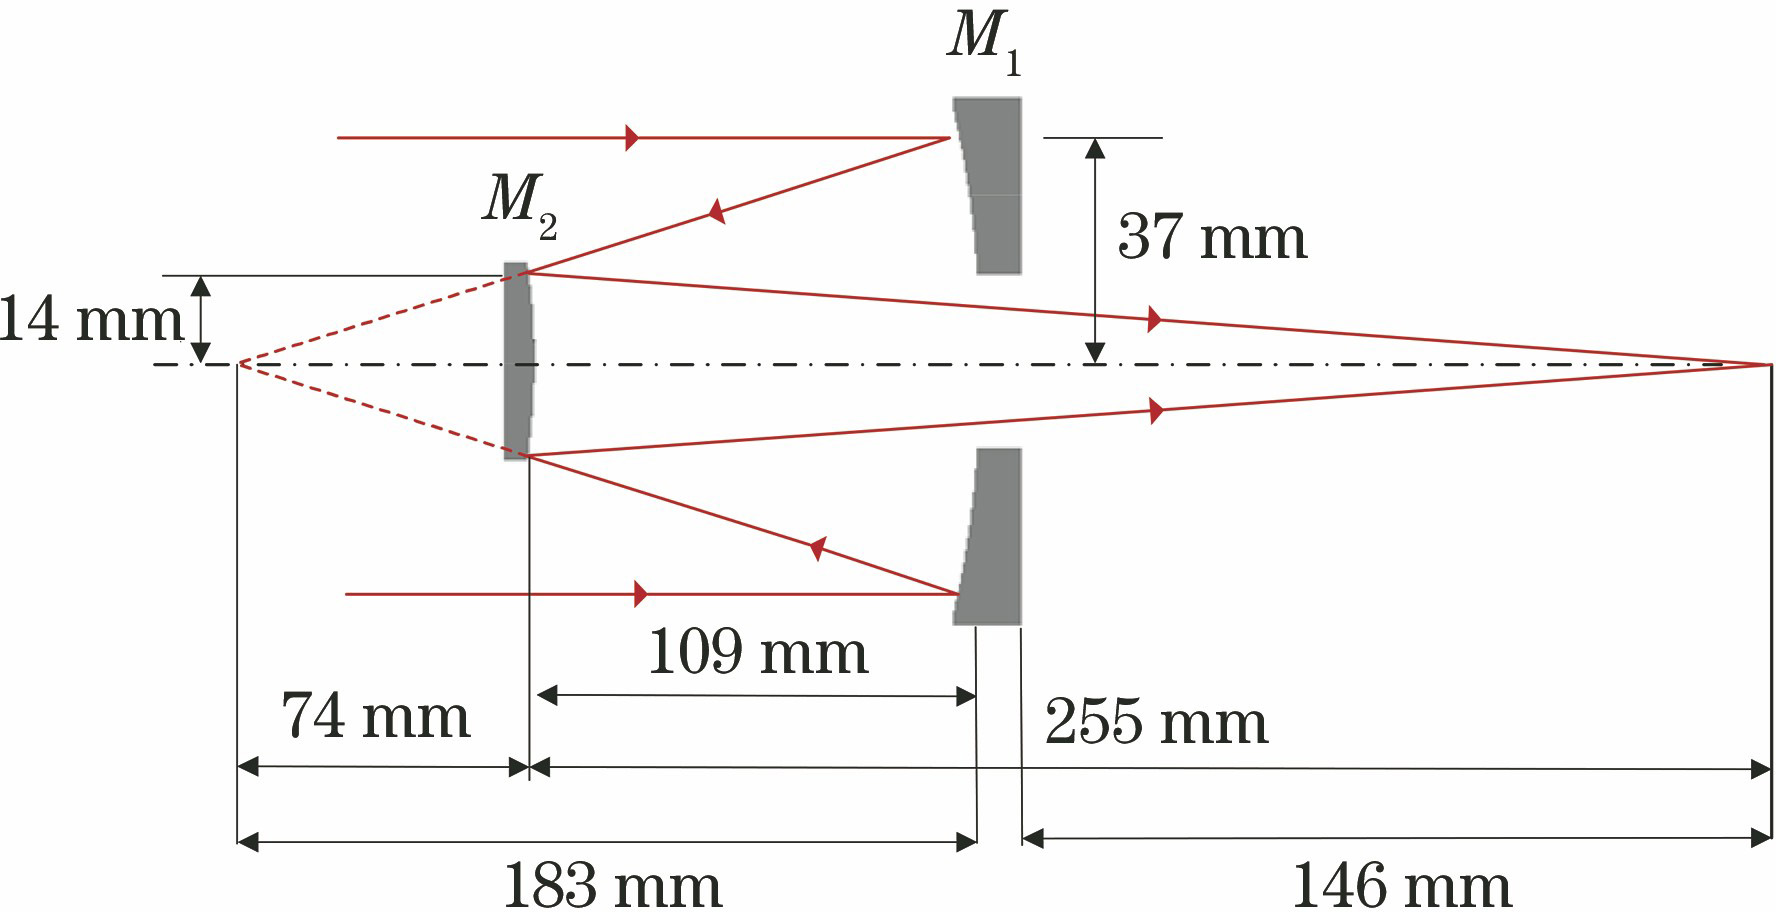 Structure of the coaxial Cassegrain system